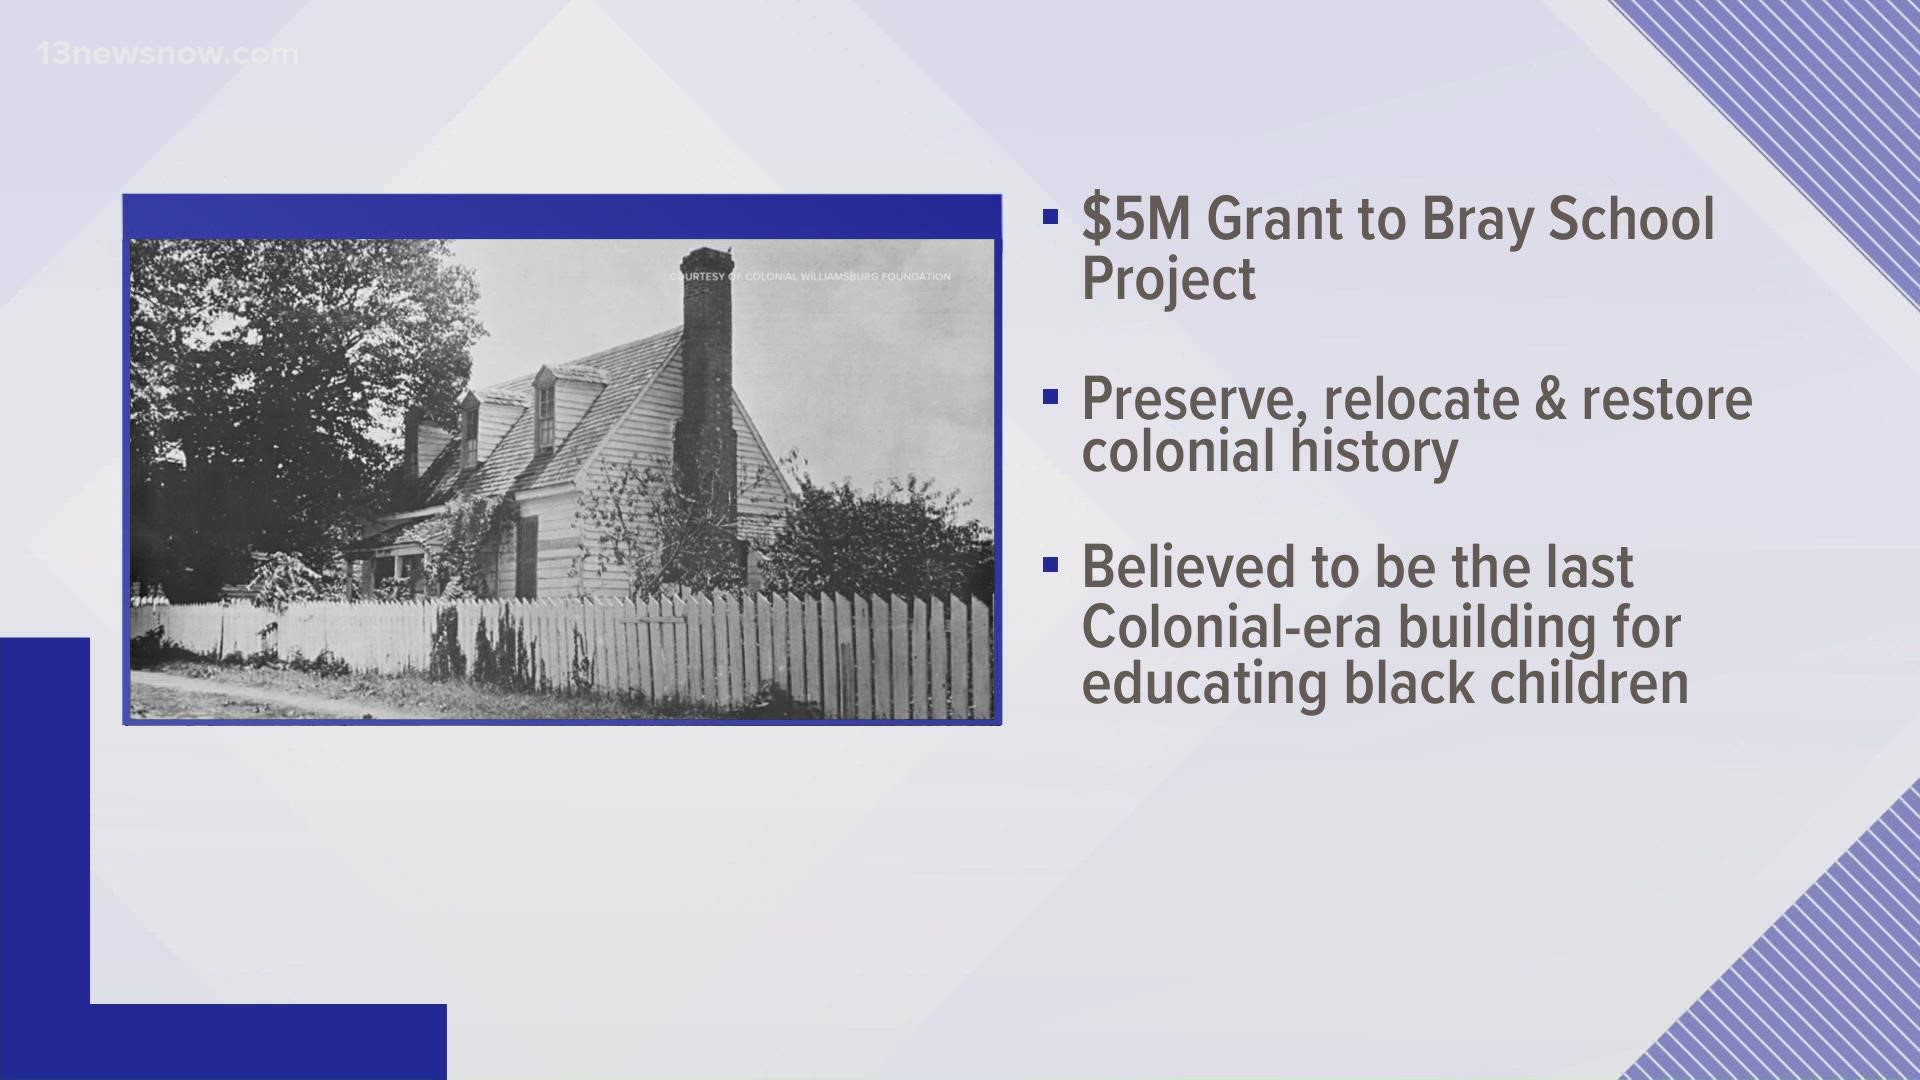 The Bray School is believed to be the only remaining colonial school building that was created to educate Black children.